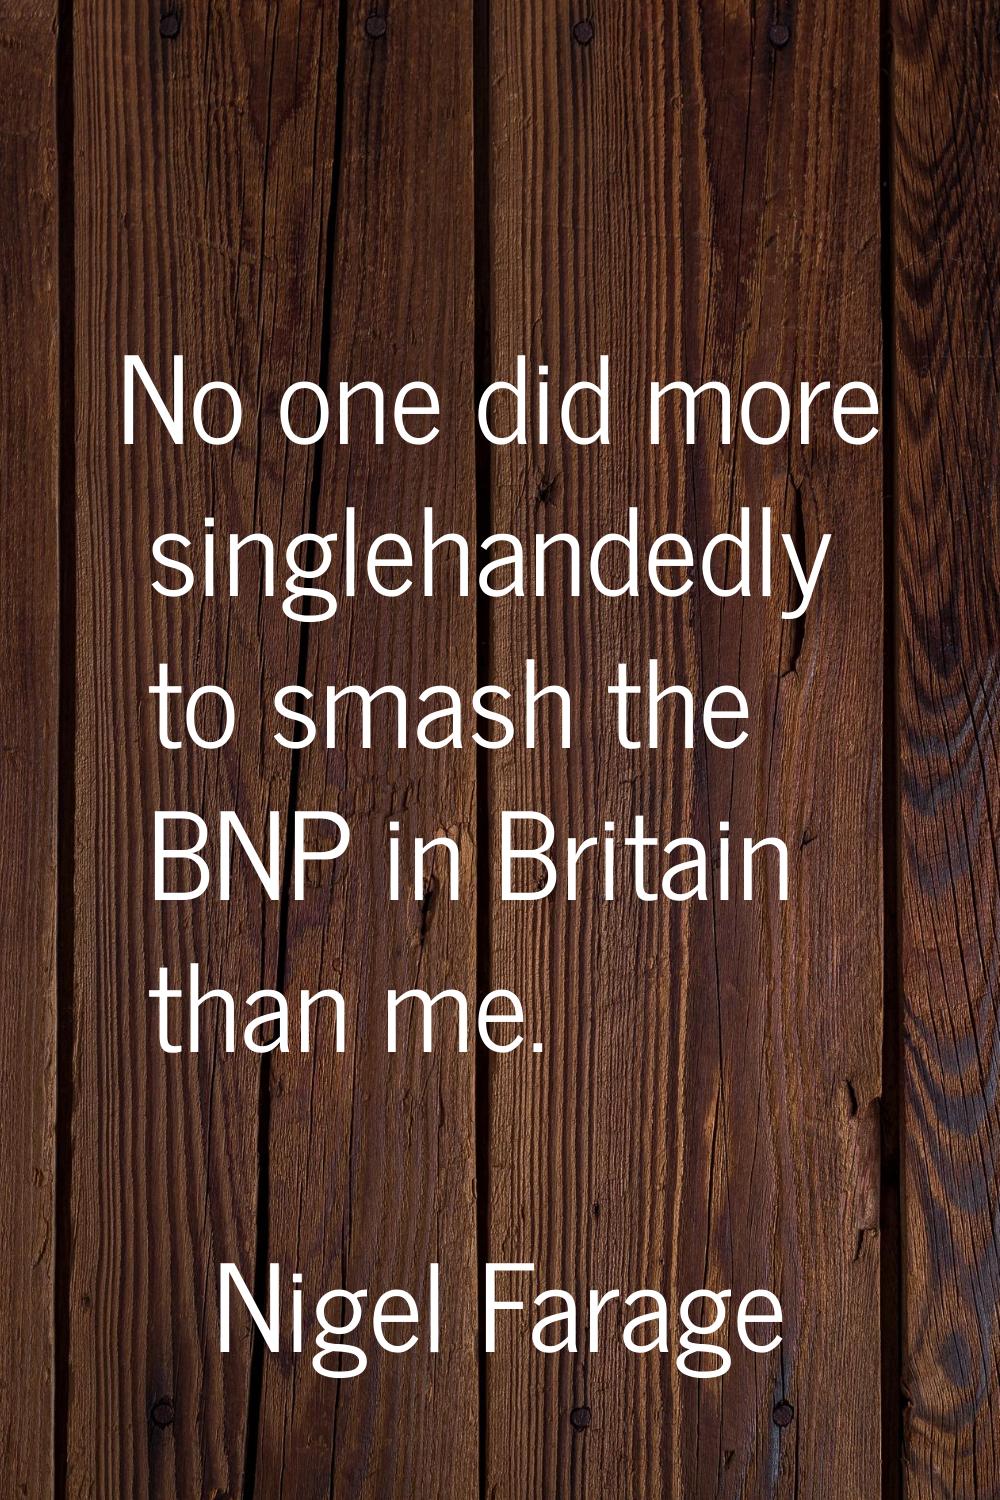 No one did more singlehandedly to smash the BNP in Britain than me.